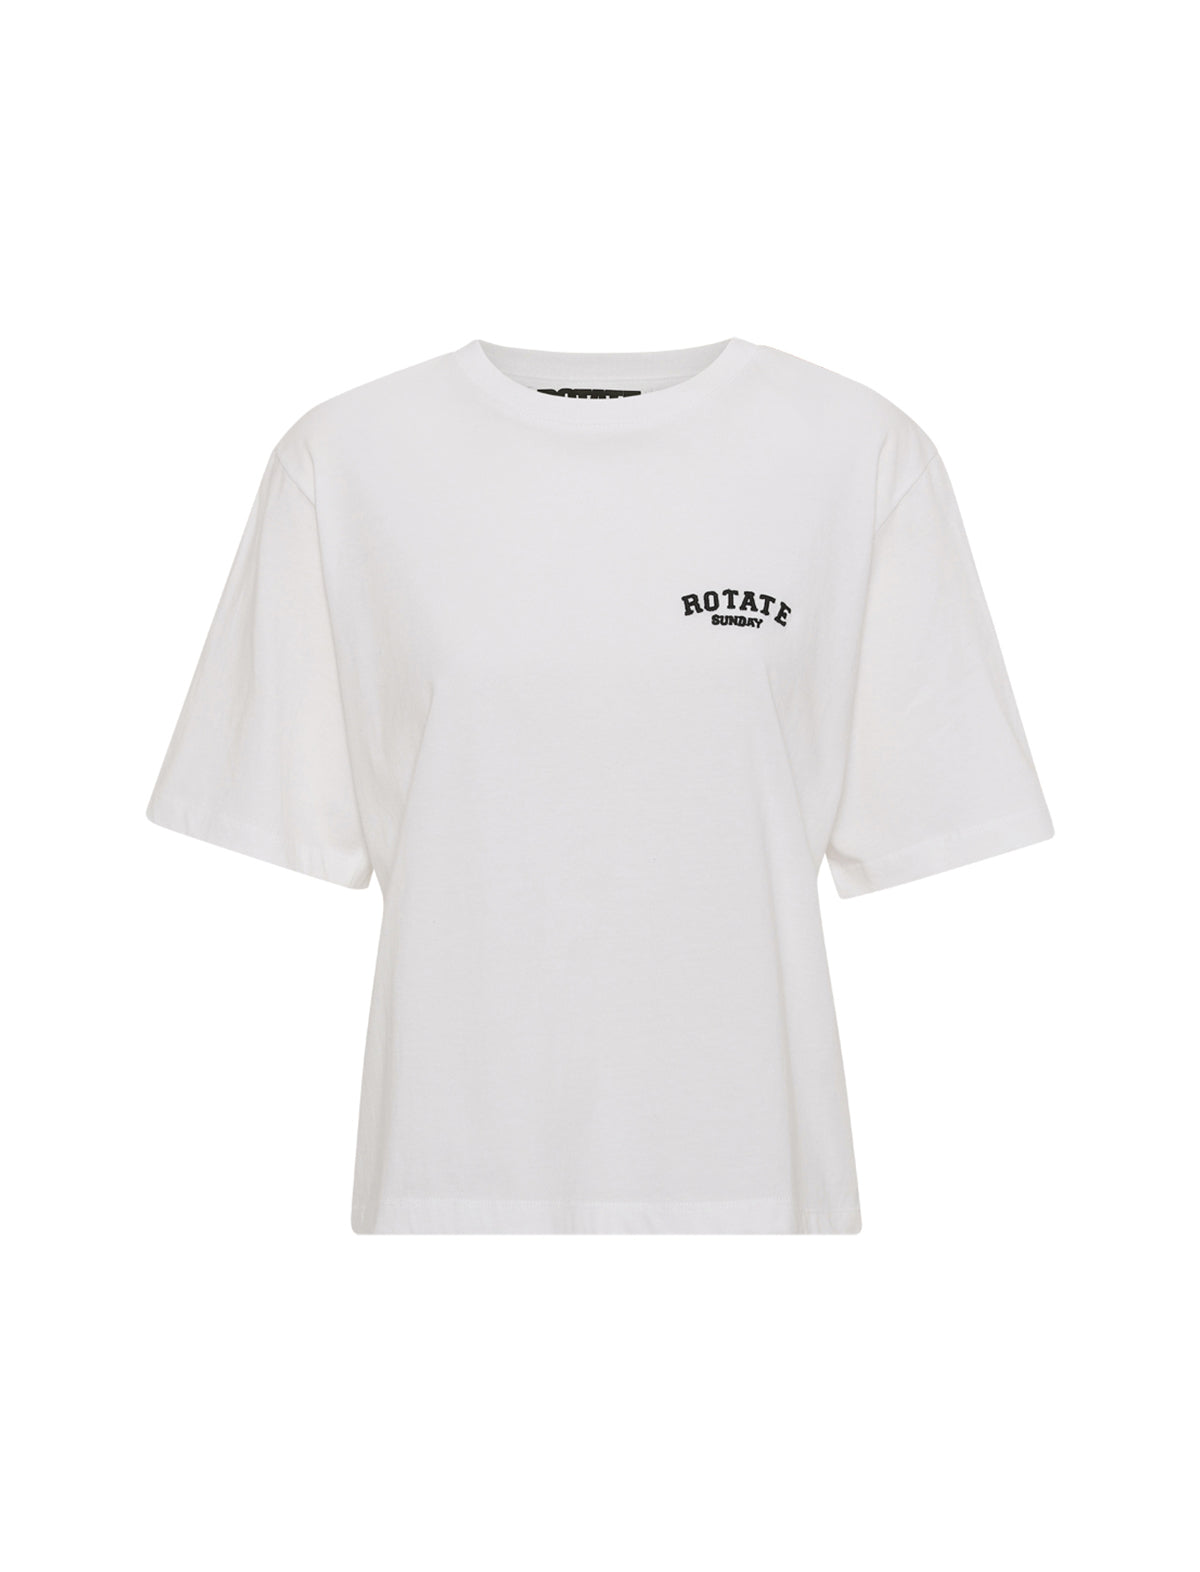 ROTATE Sunday 3 Aster T-Shirt in White